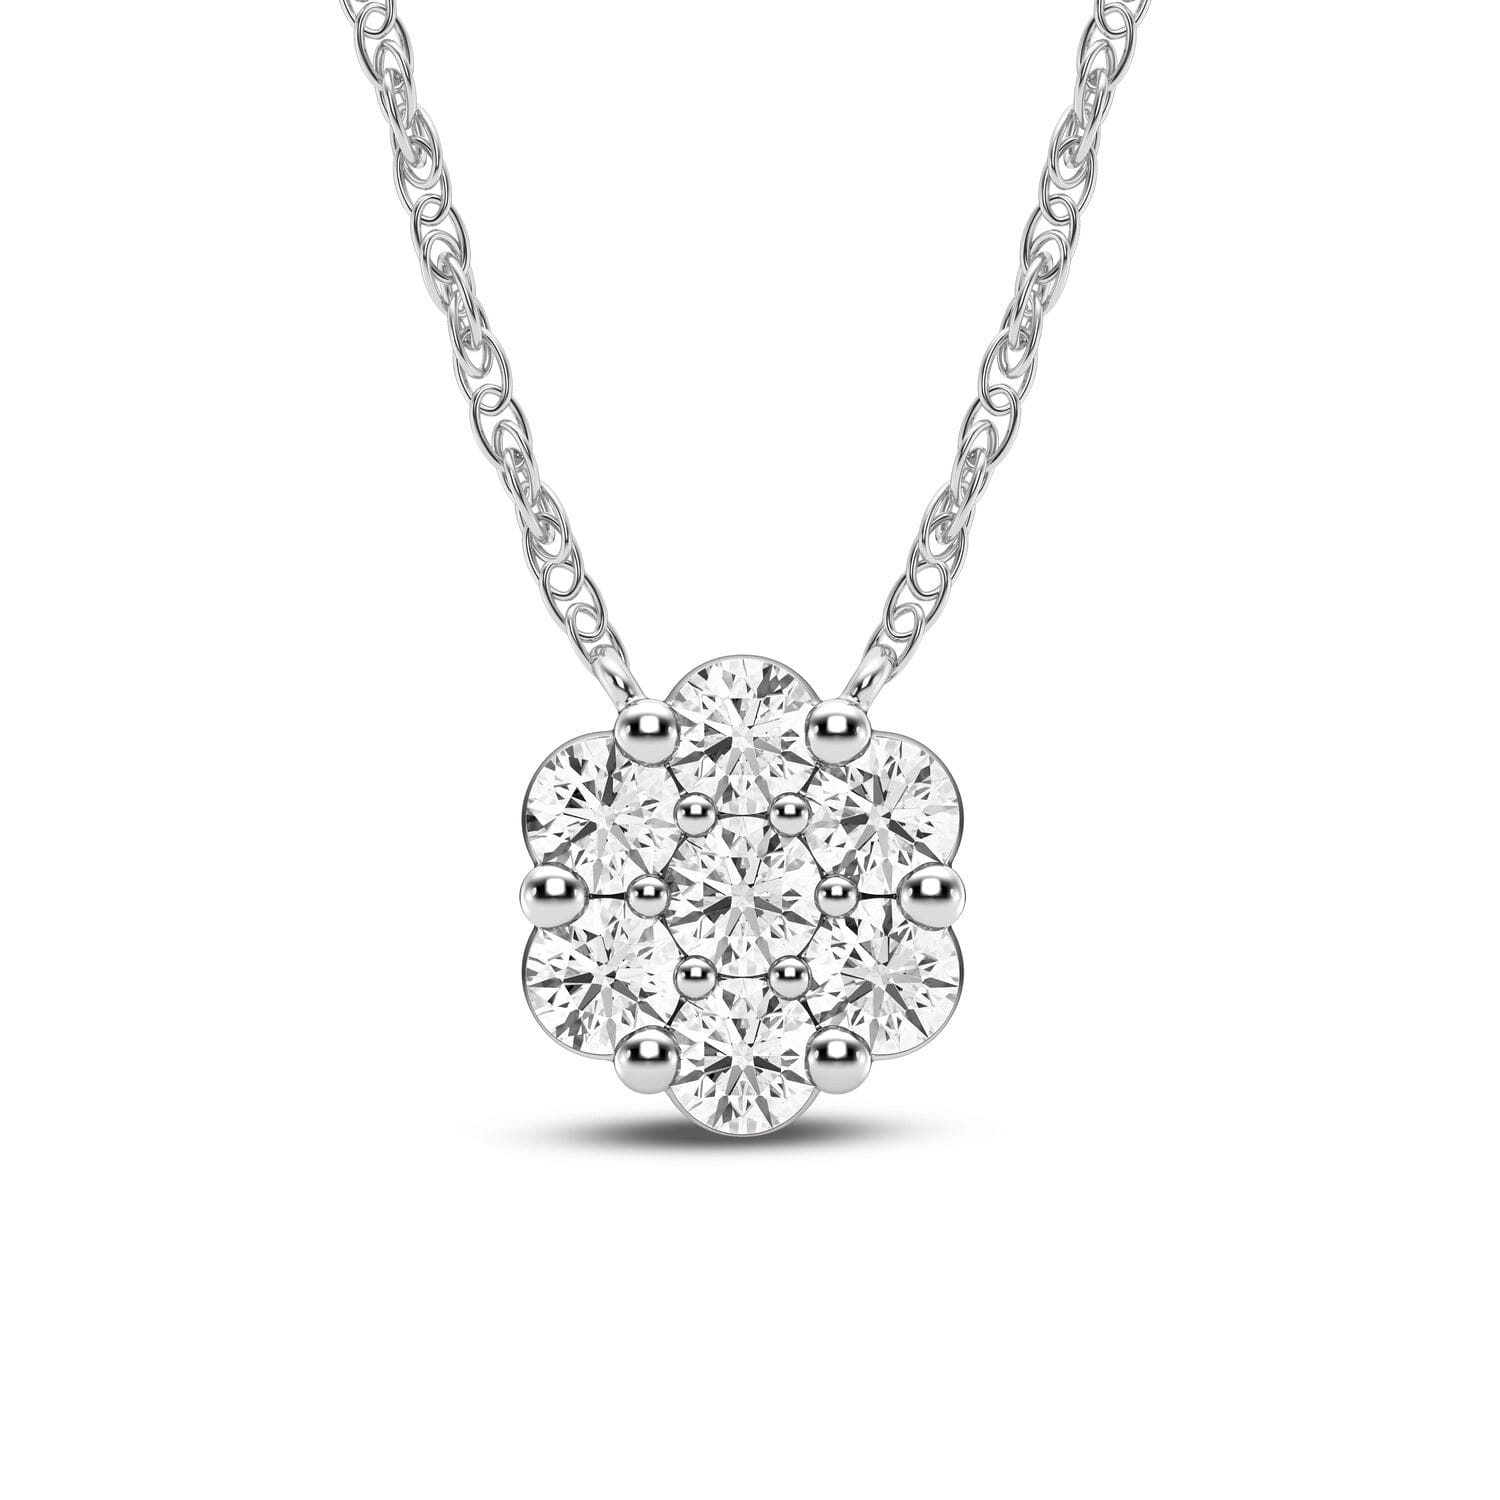 Meera Flower Necklace with 1/3ct of Laboratory Grown Diamonds in 9ct White Gold Necklaces Bevilles 